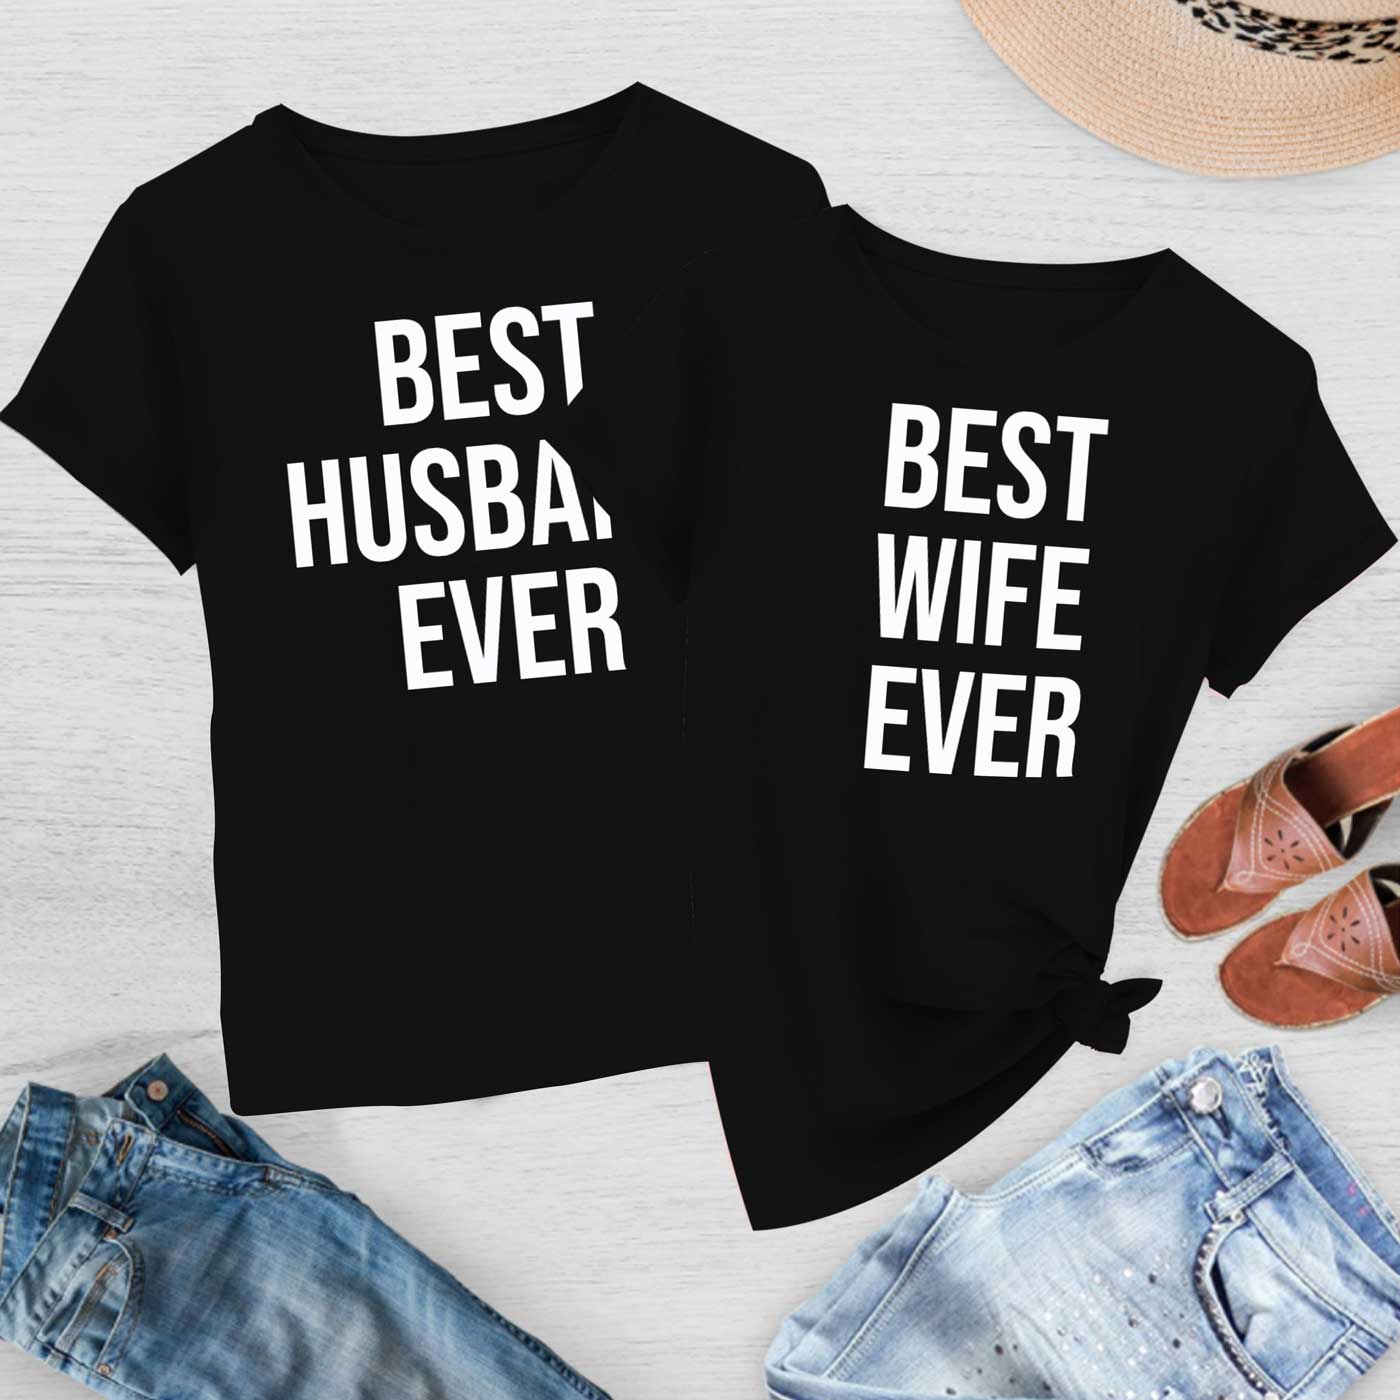 Best Wife Ever - Best Husband Ever Tees (236)